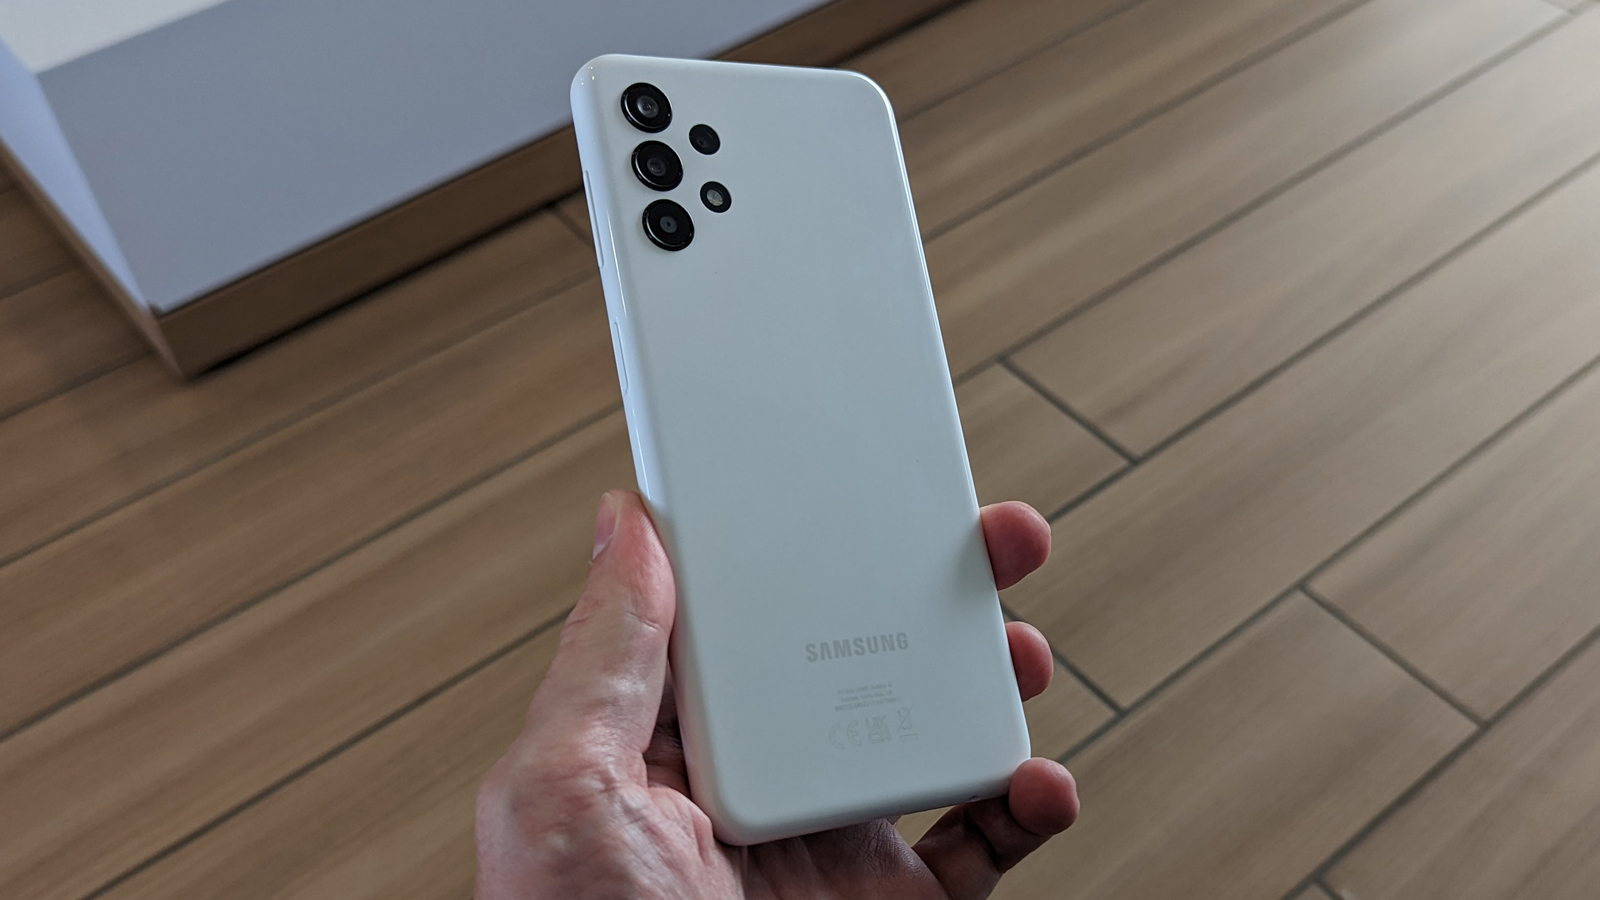 The back of the Samsung Galaxy A13 being held in a hand